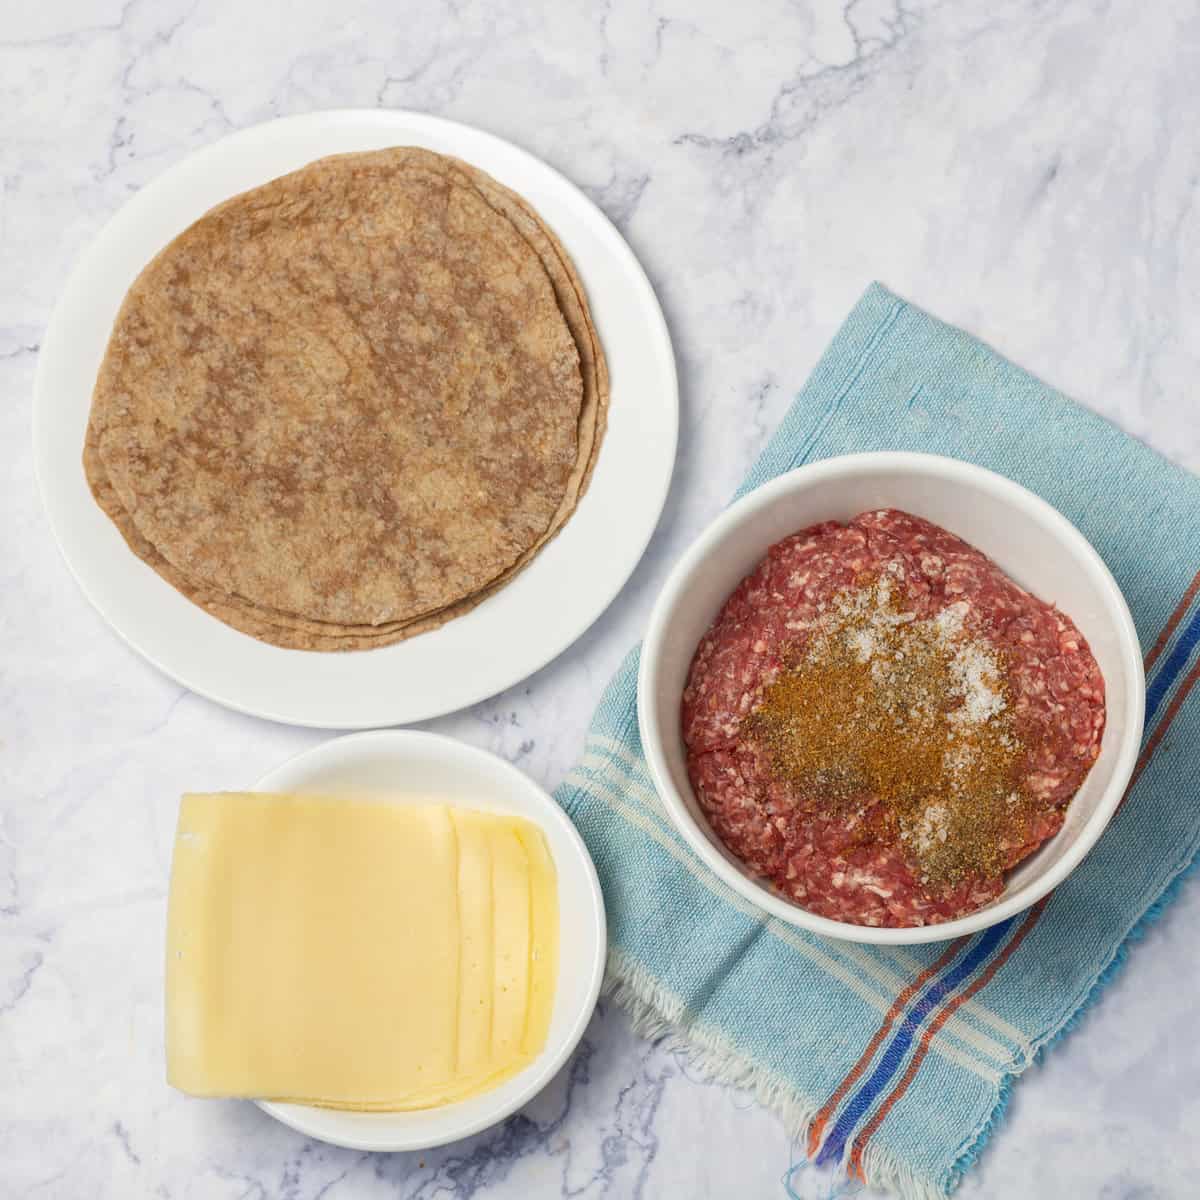 Ground beef marinating in seasonings with tortillas and cheese in separate dishes.